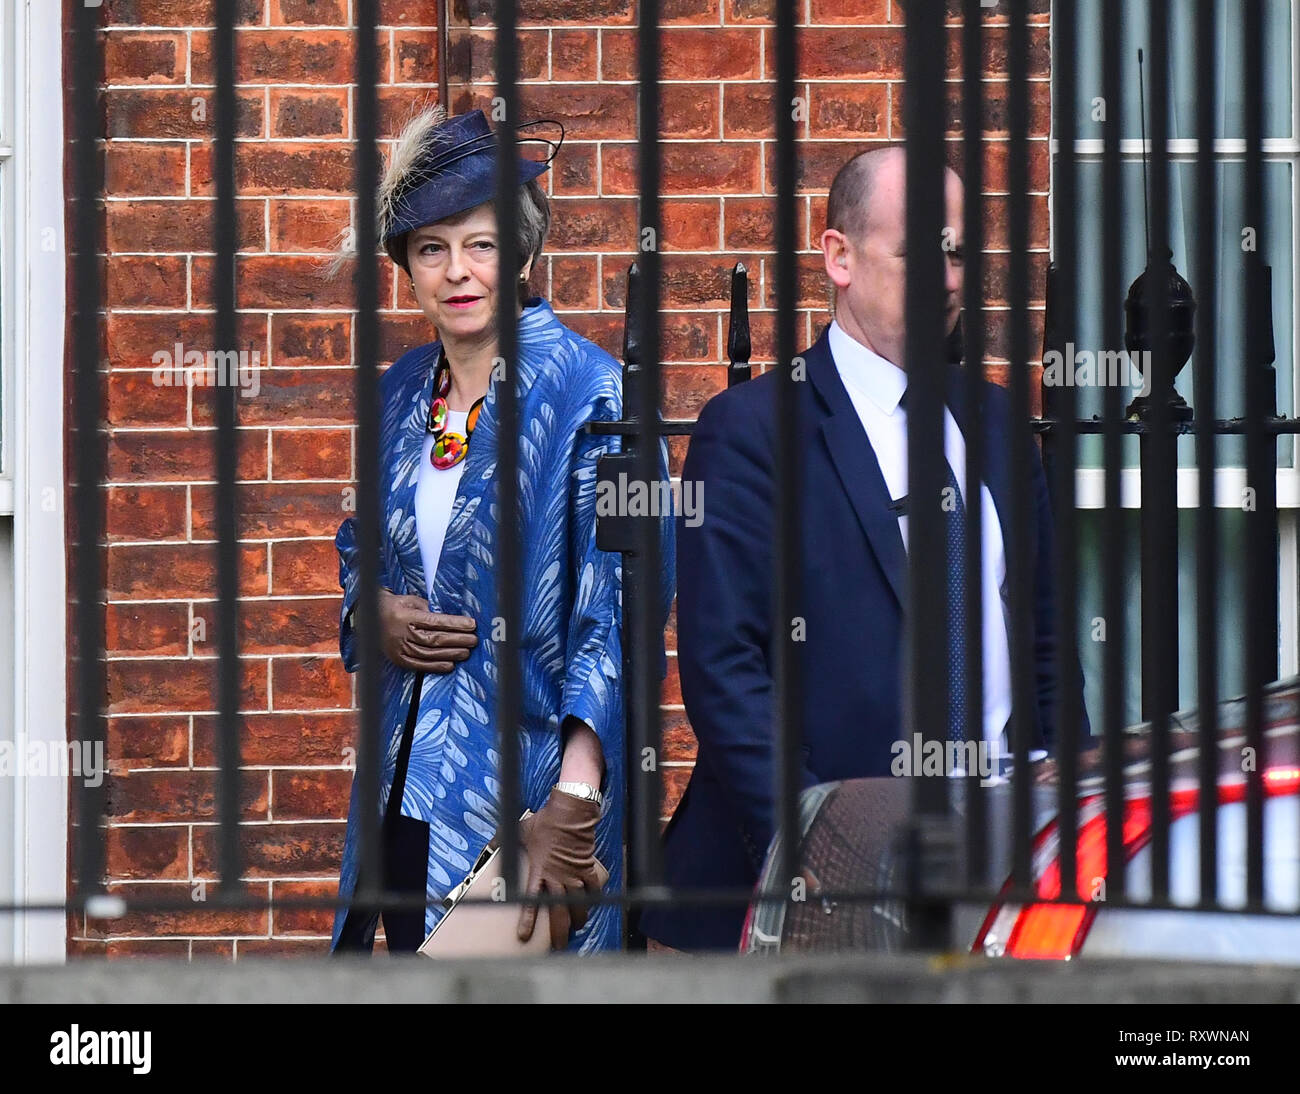 Prime Minister Theresa May leaves from the rear entrance of Downing Street, London, after she said the meaningful vote on Tuesday on her Brexit deal will go ahead. Stock Photo